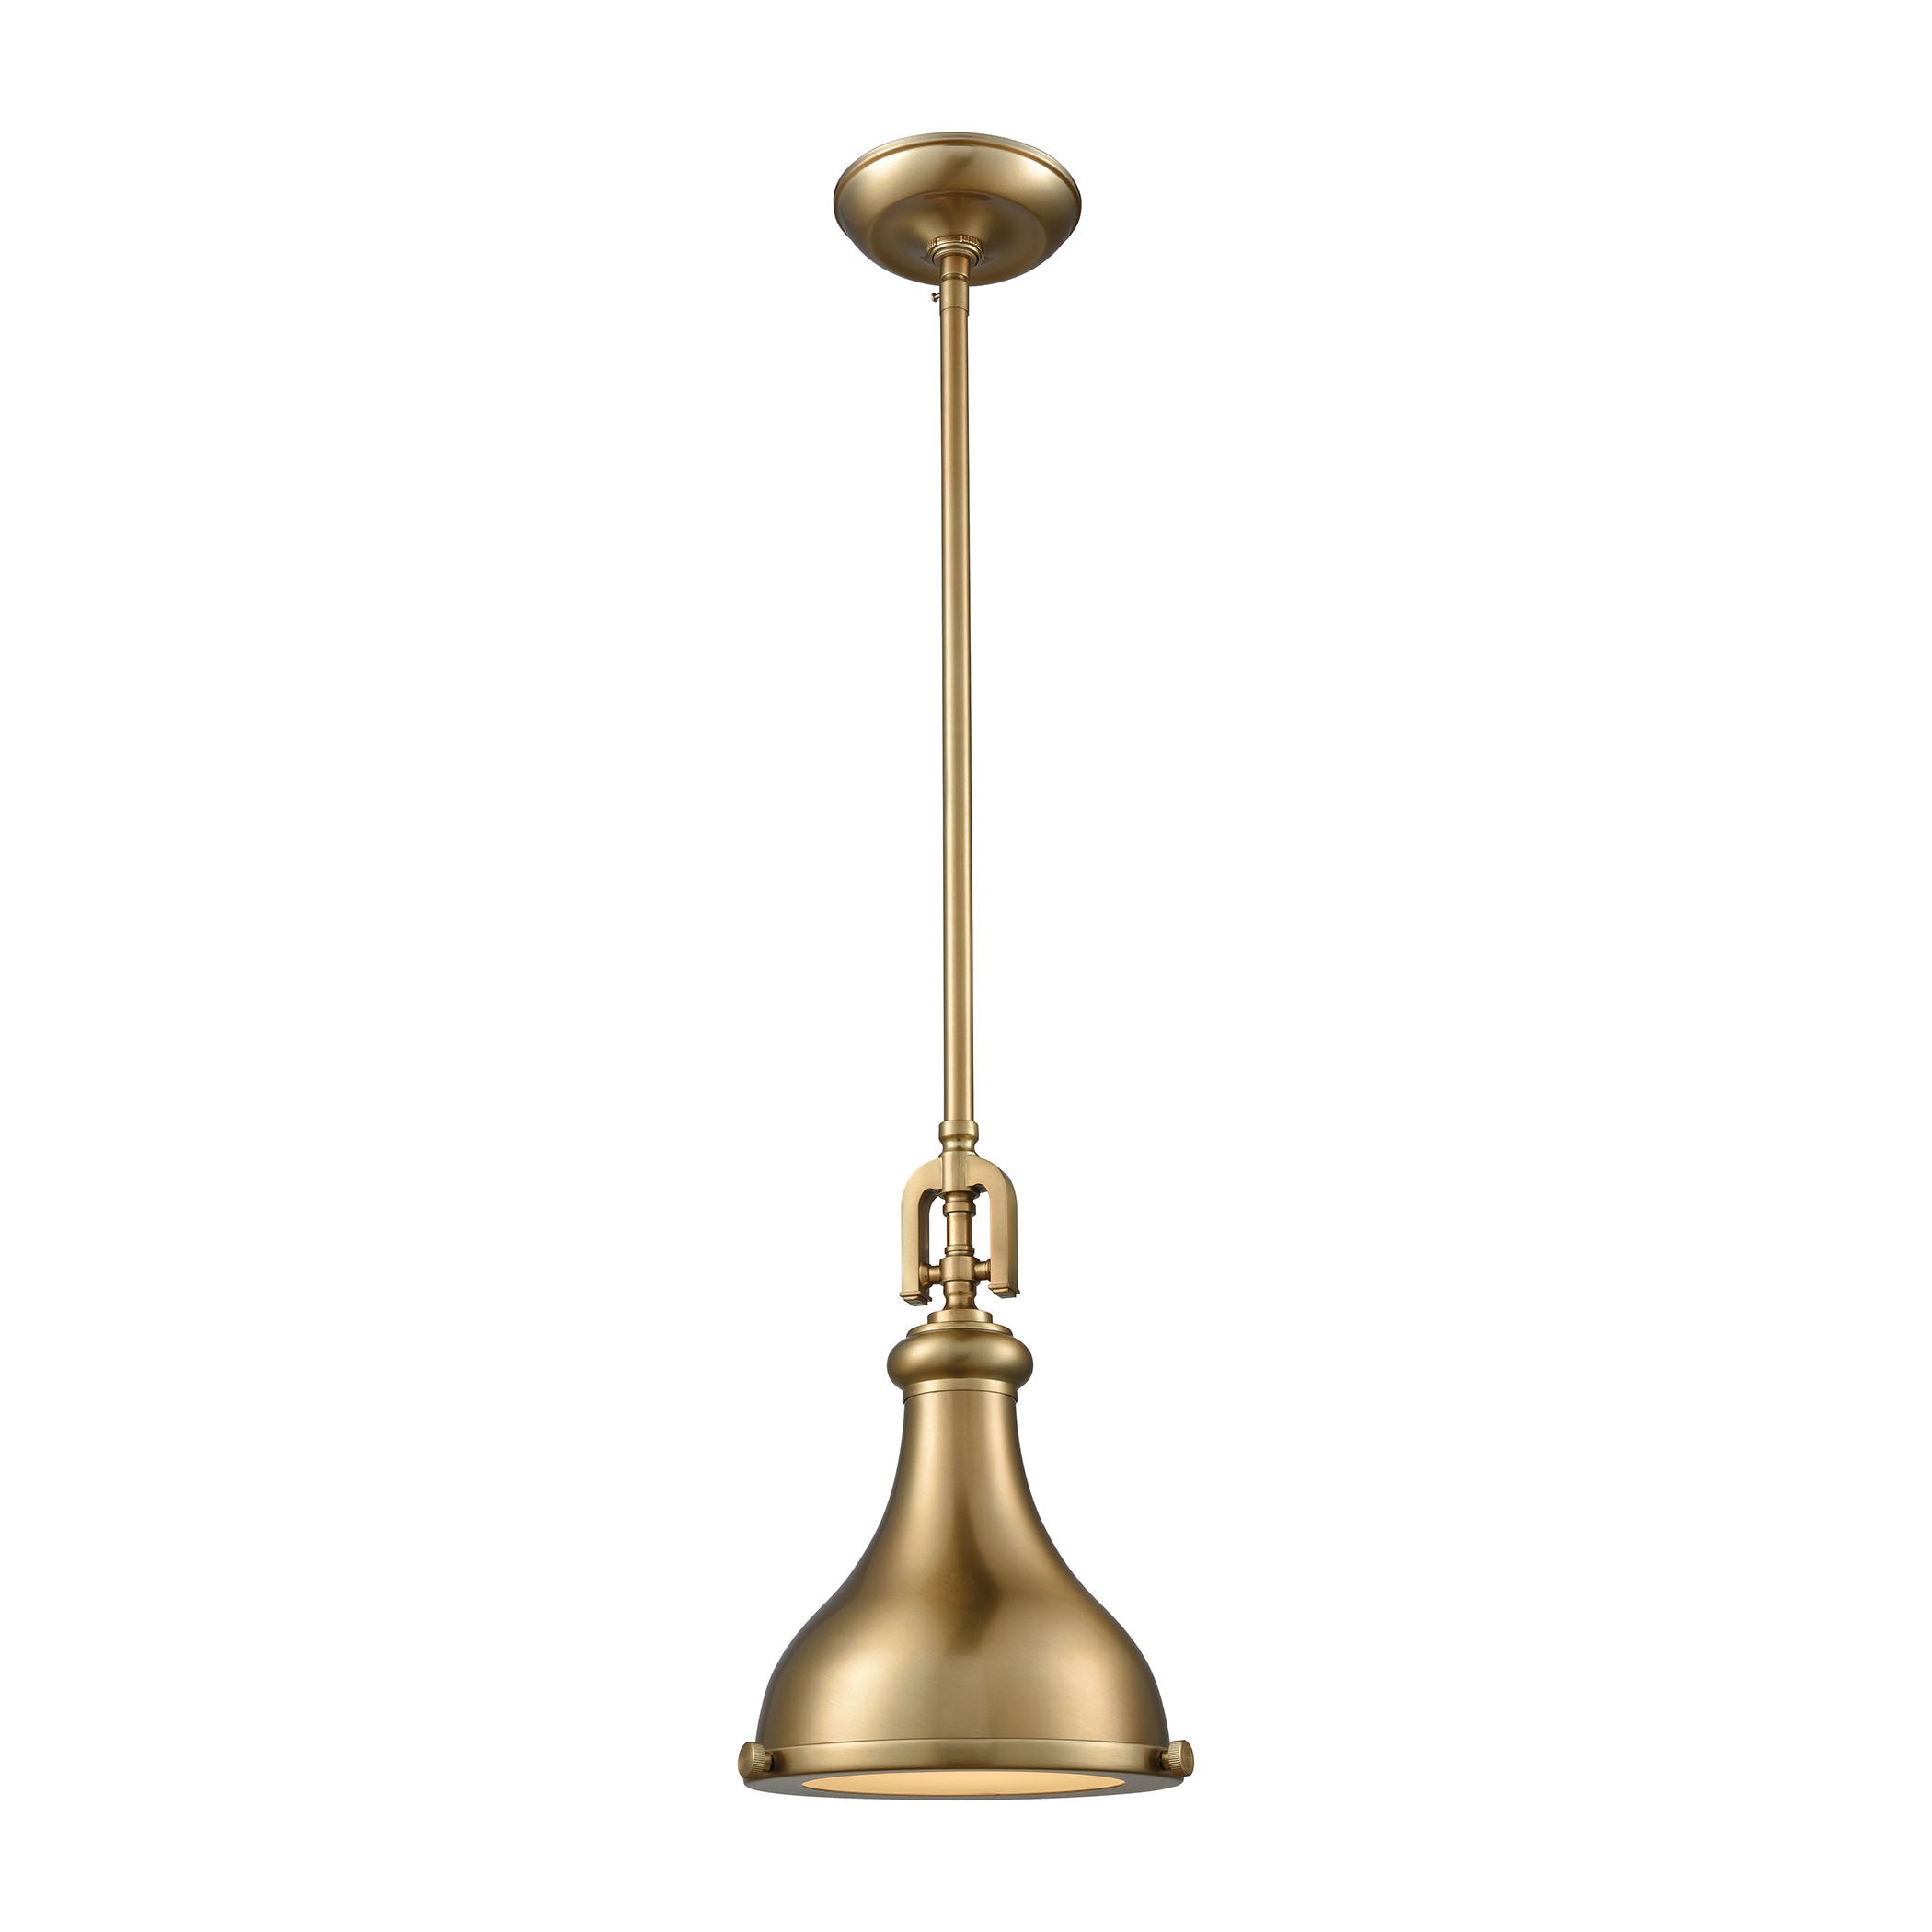 ELK Lighting 57070/1-LA Rutherford 1-Light Mini Pendant in Satin Brass with Metal Shade - Includes Recessed Adapter Kit